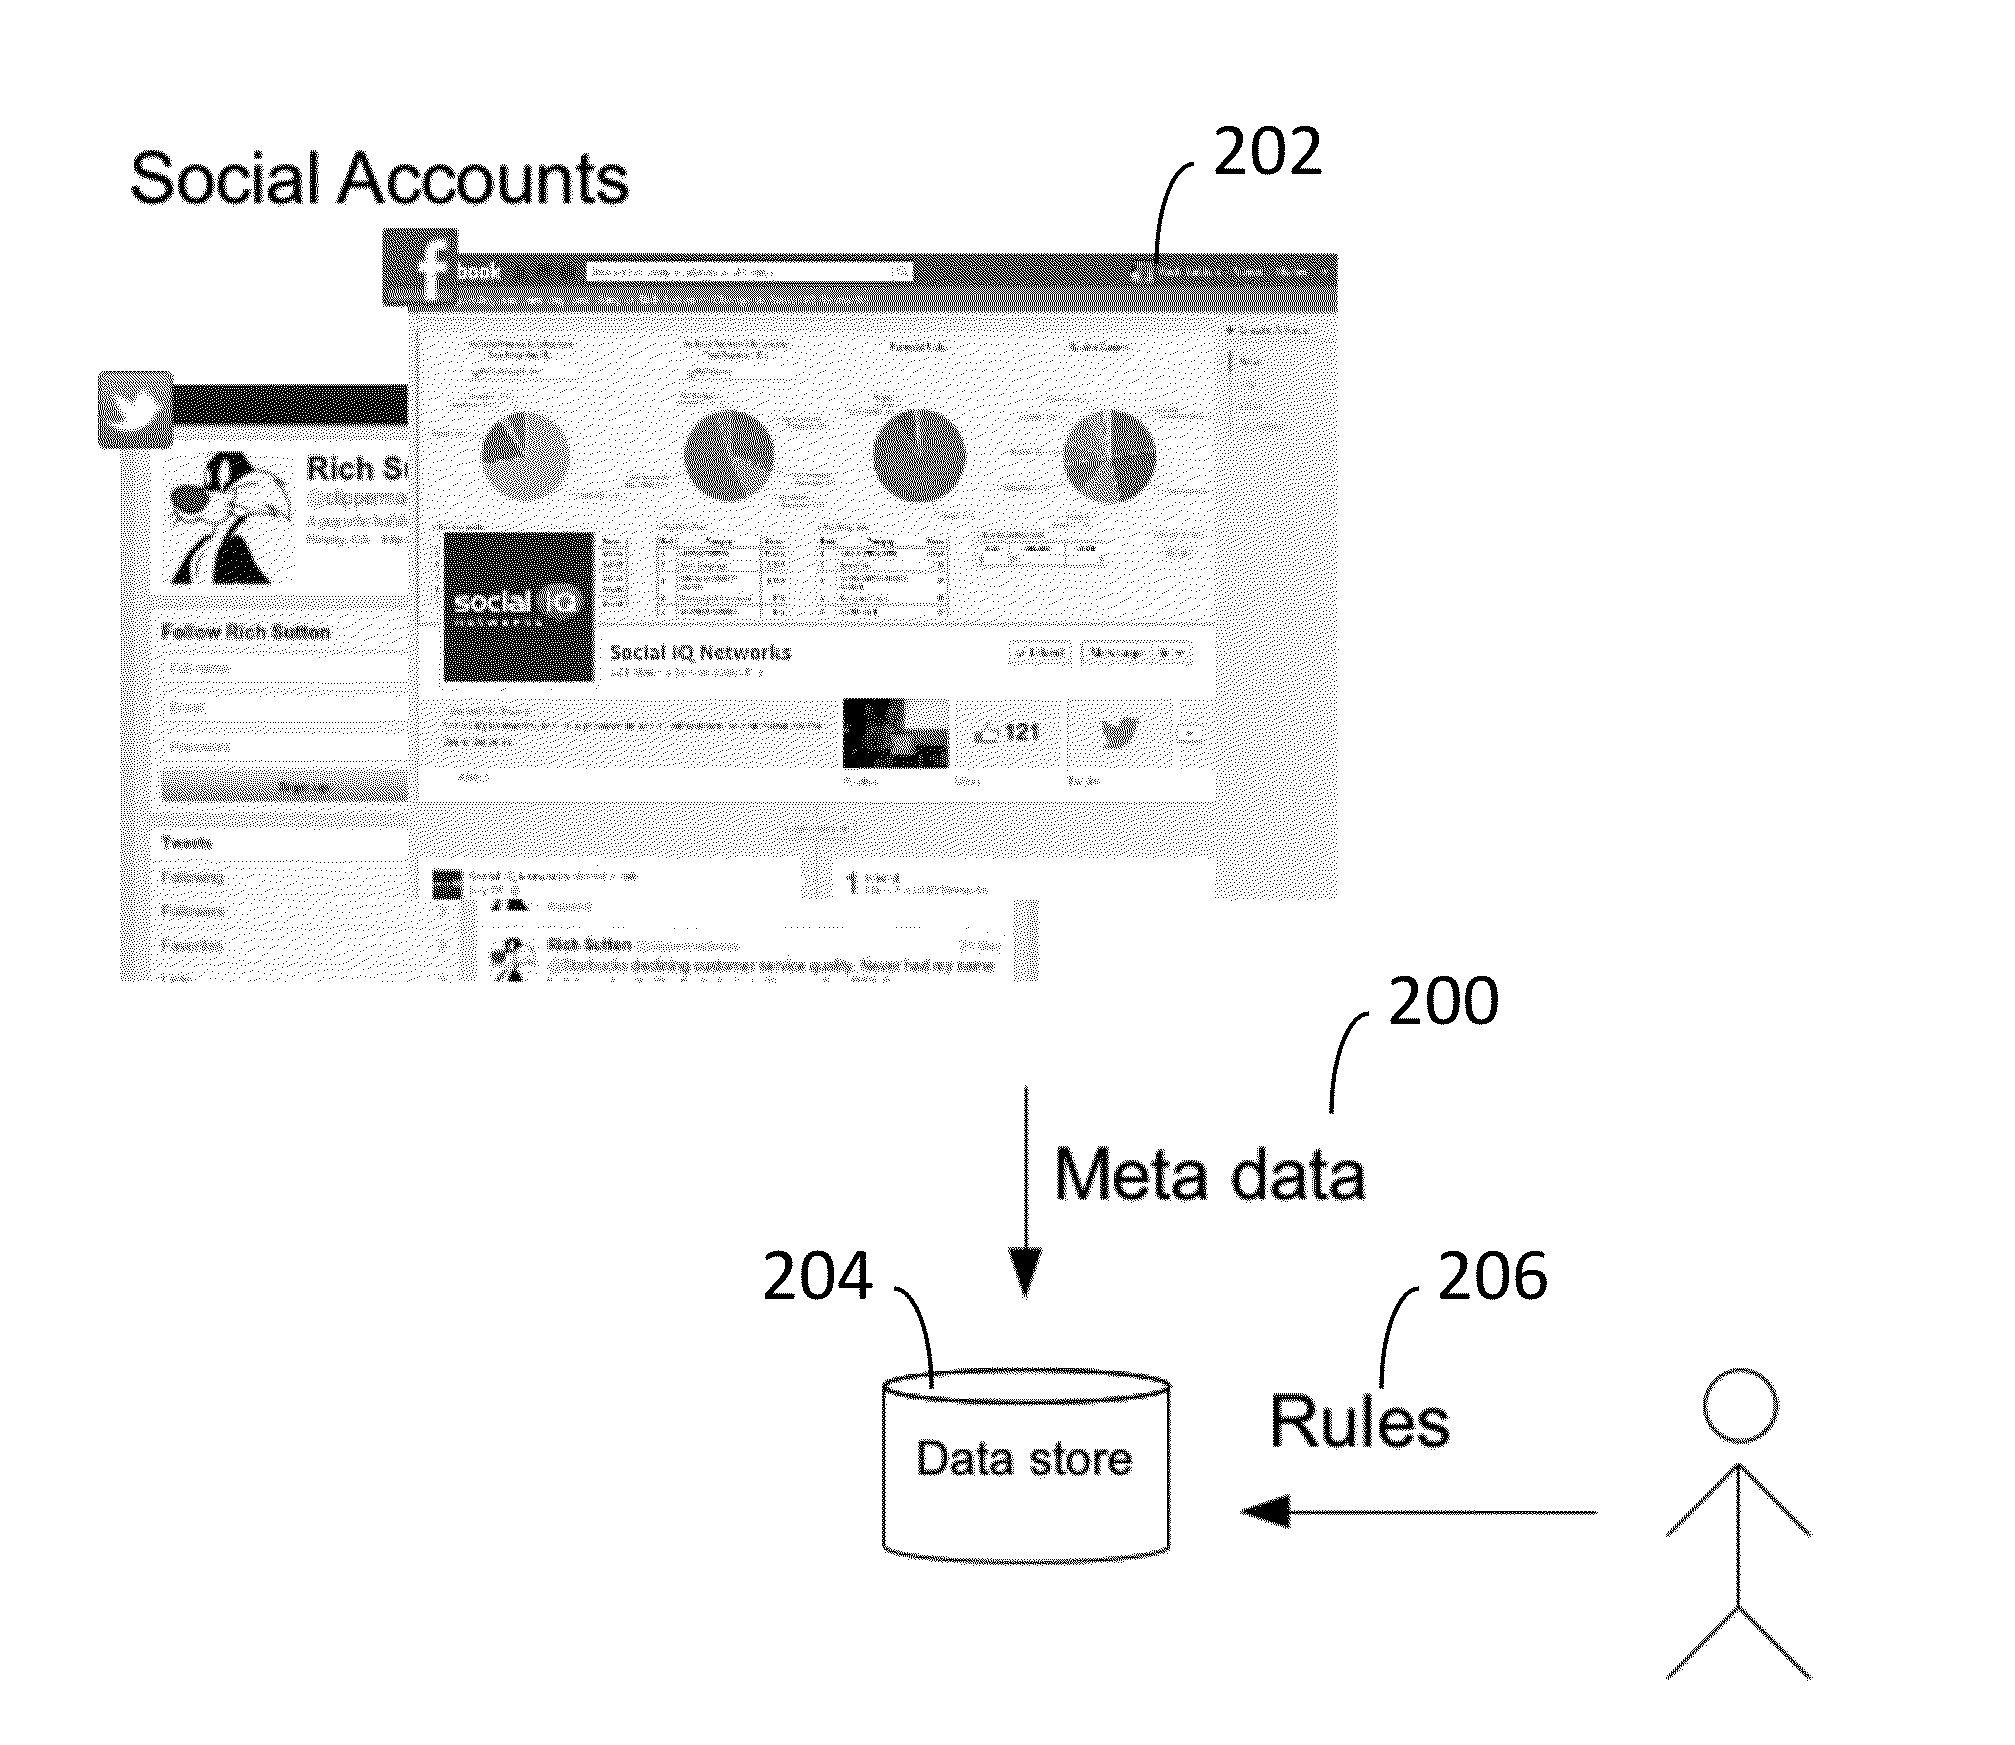 Apparatus and Method for Social Account Access Control